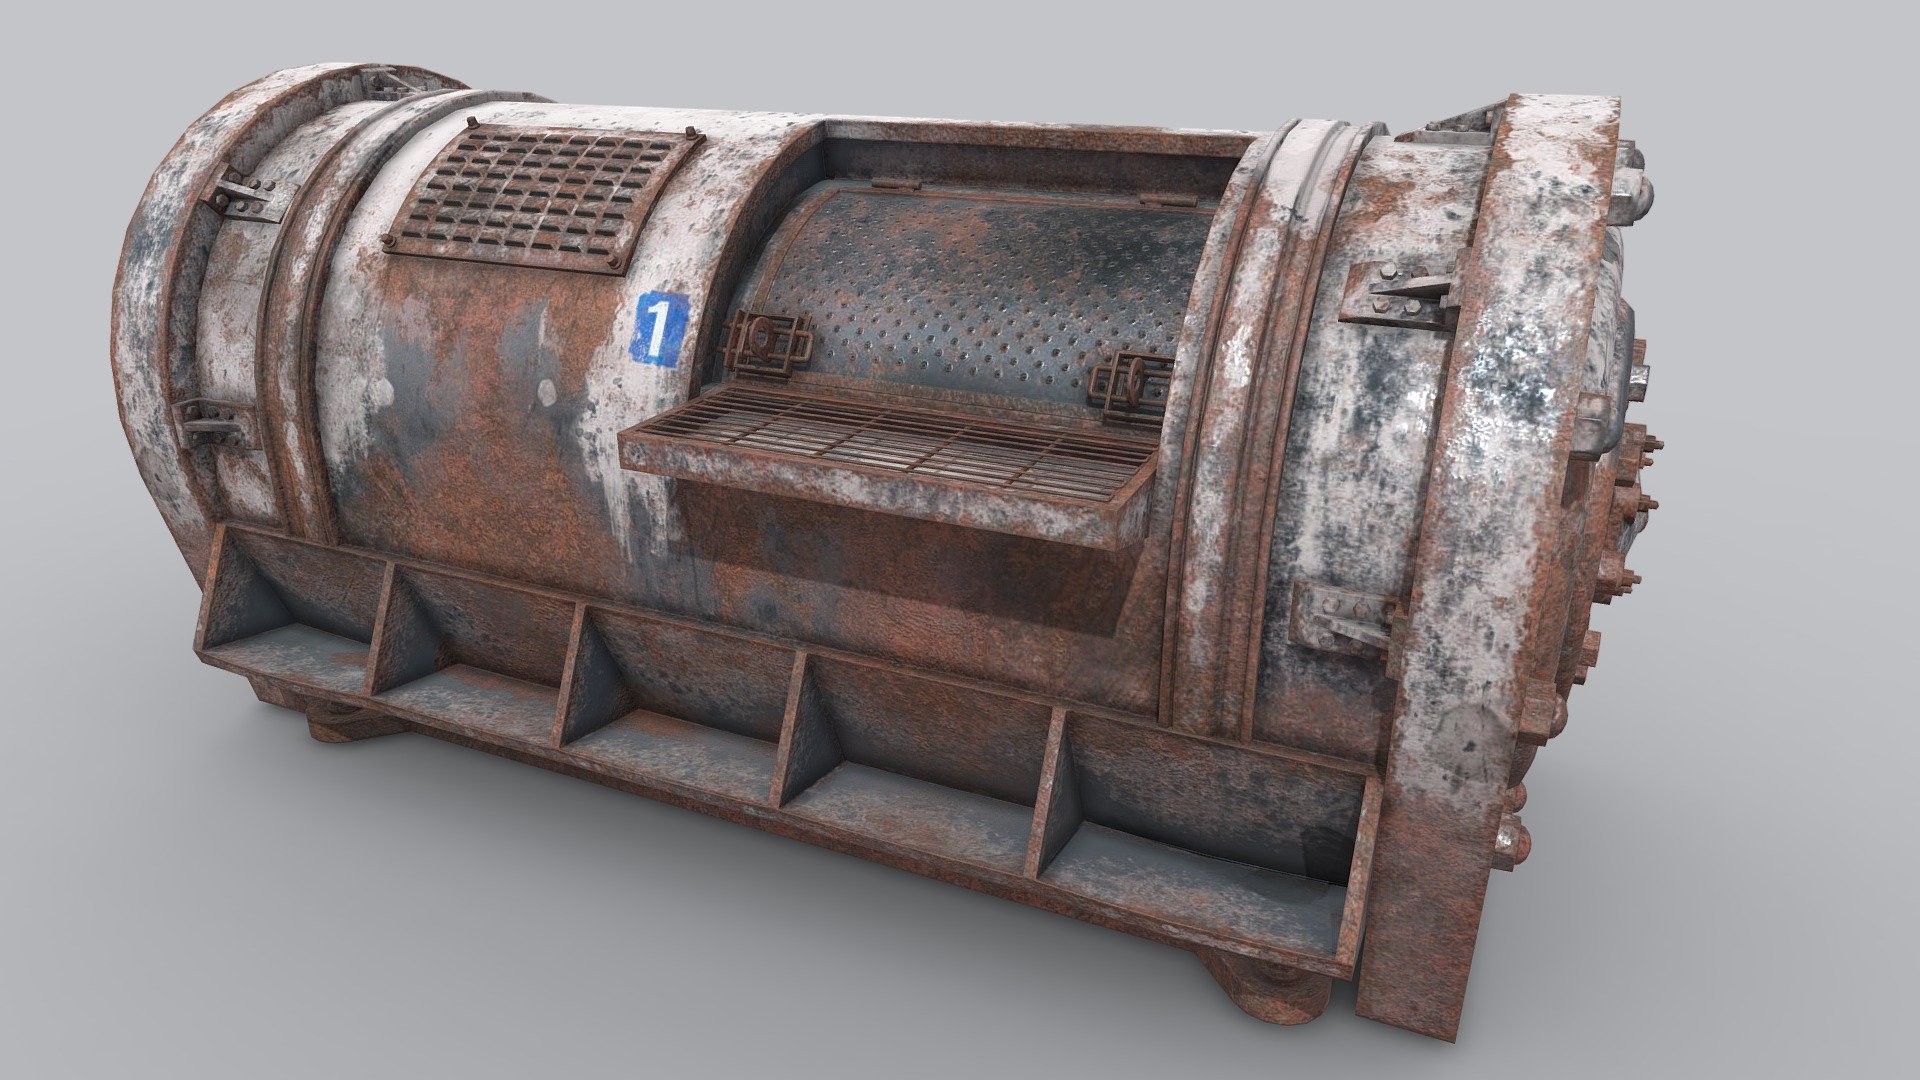 An industrial laundry machine for a Half Life: Alyx mod - Half Life 2 inspired laundry machine - Download Free 3D model by Kidney_02 (@Kidney02) 3d model